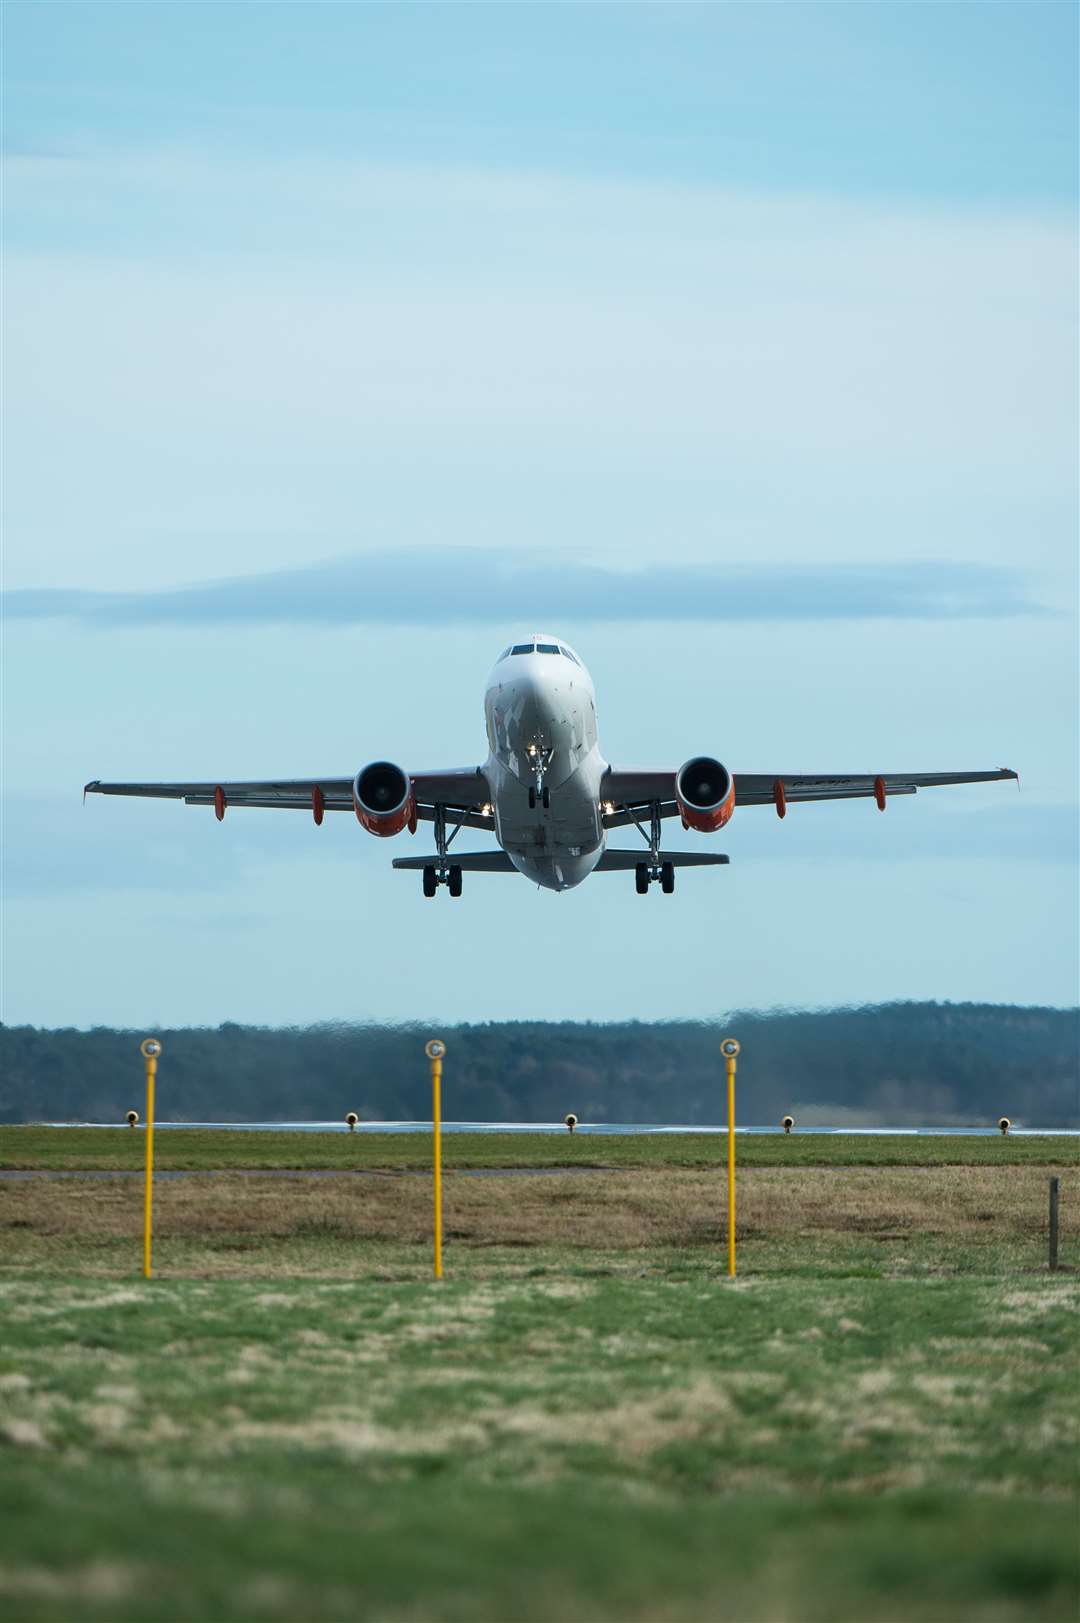 EasyJet will resume limited flights between Inverness and Gatwick on June 15.